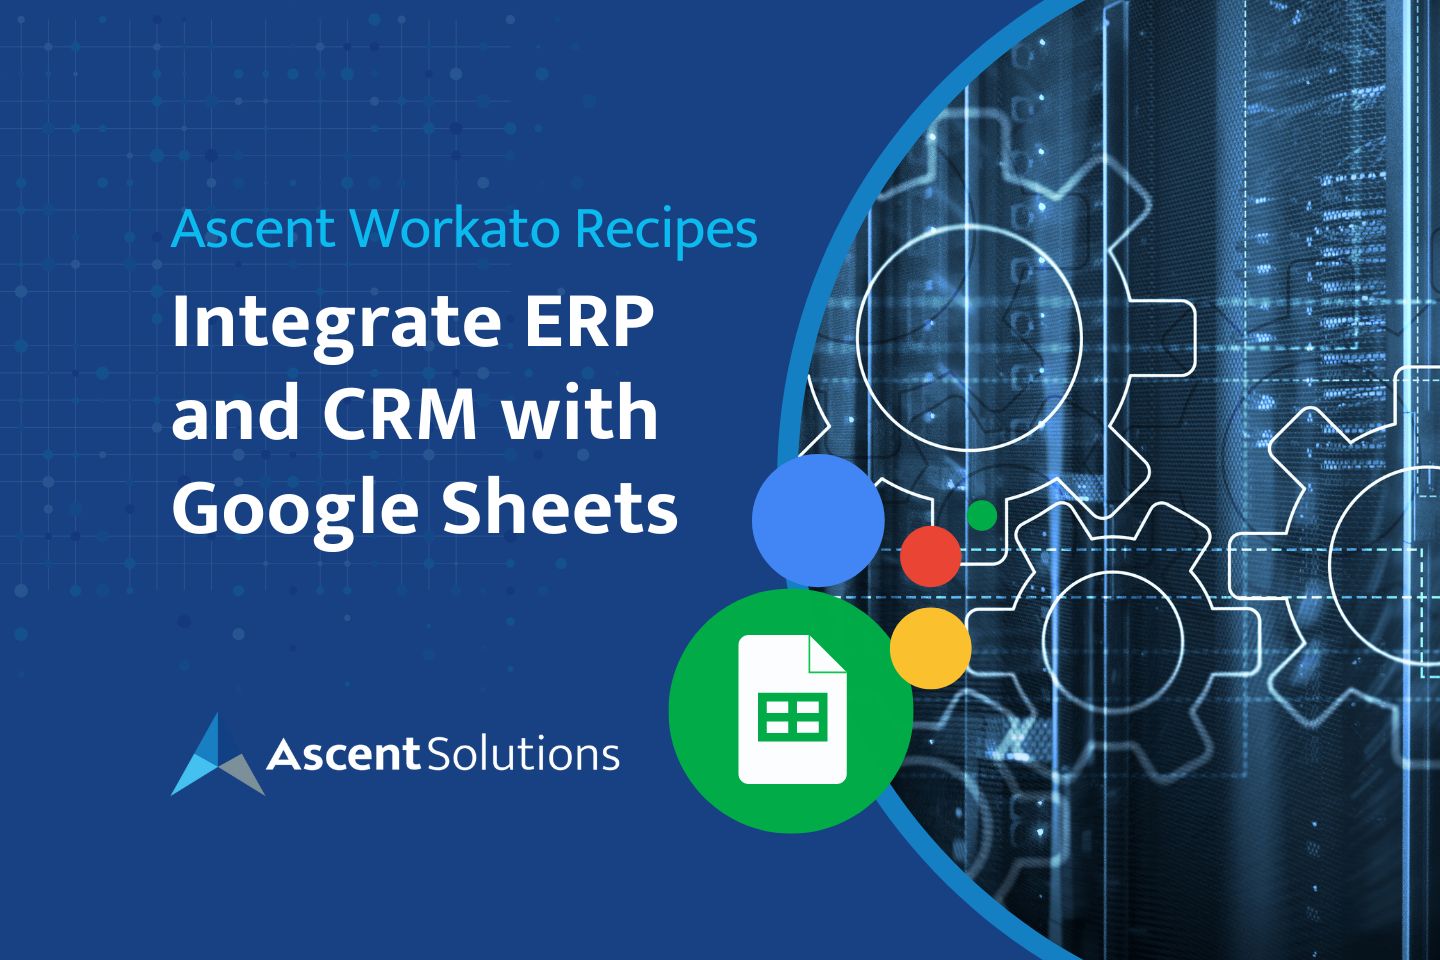 Ascent Workato Recipes Integrate ERP and CRM with Google Sheets